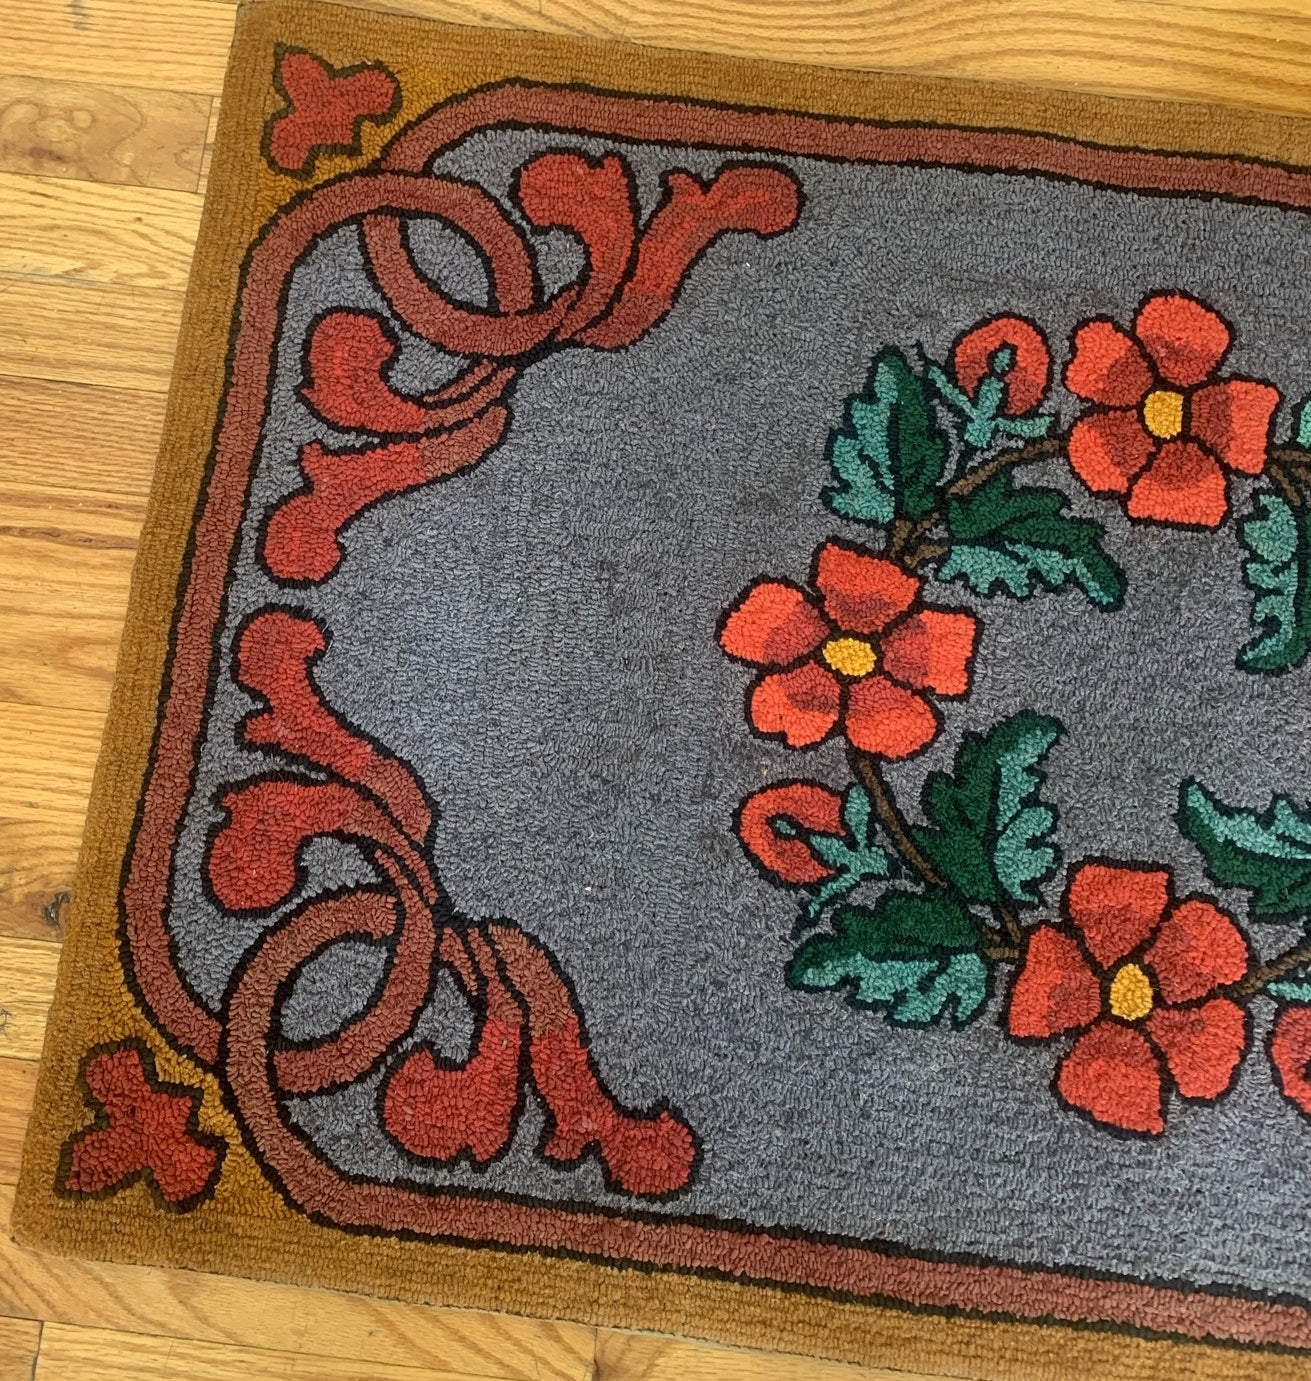 Close-up of intricate details on the Hooked rug